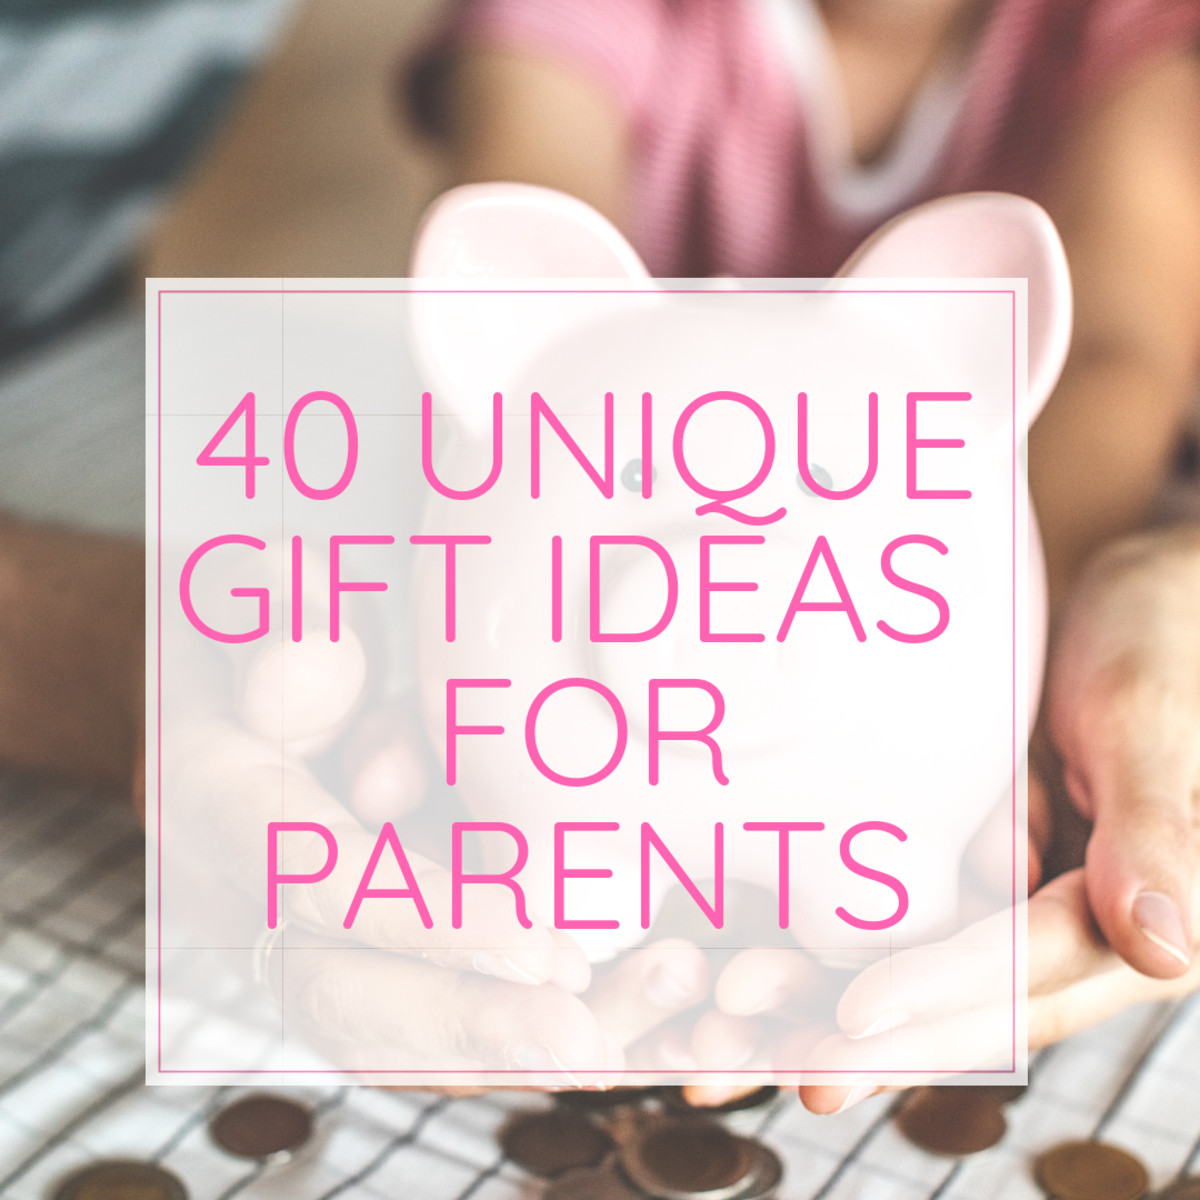 Gift Ideas For Girlfriends Parents
 Original Gift Ideas for Seniors Who Don’t Want Anything